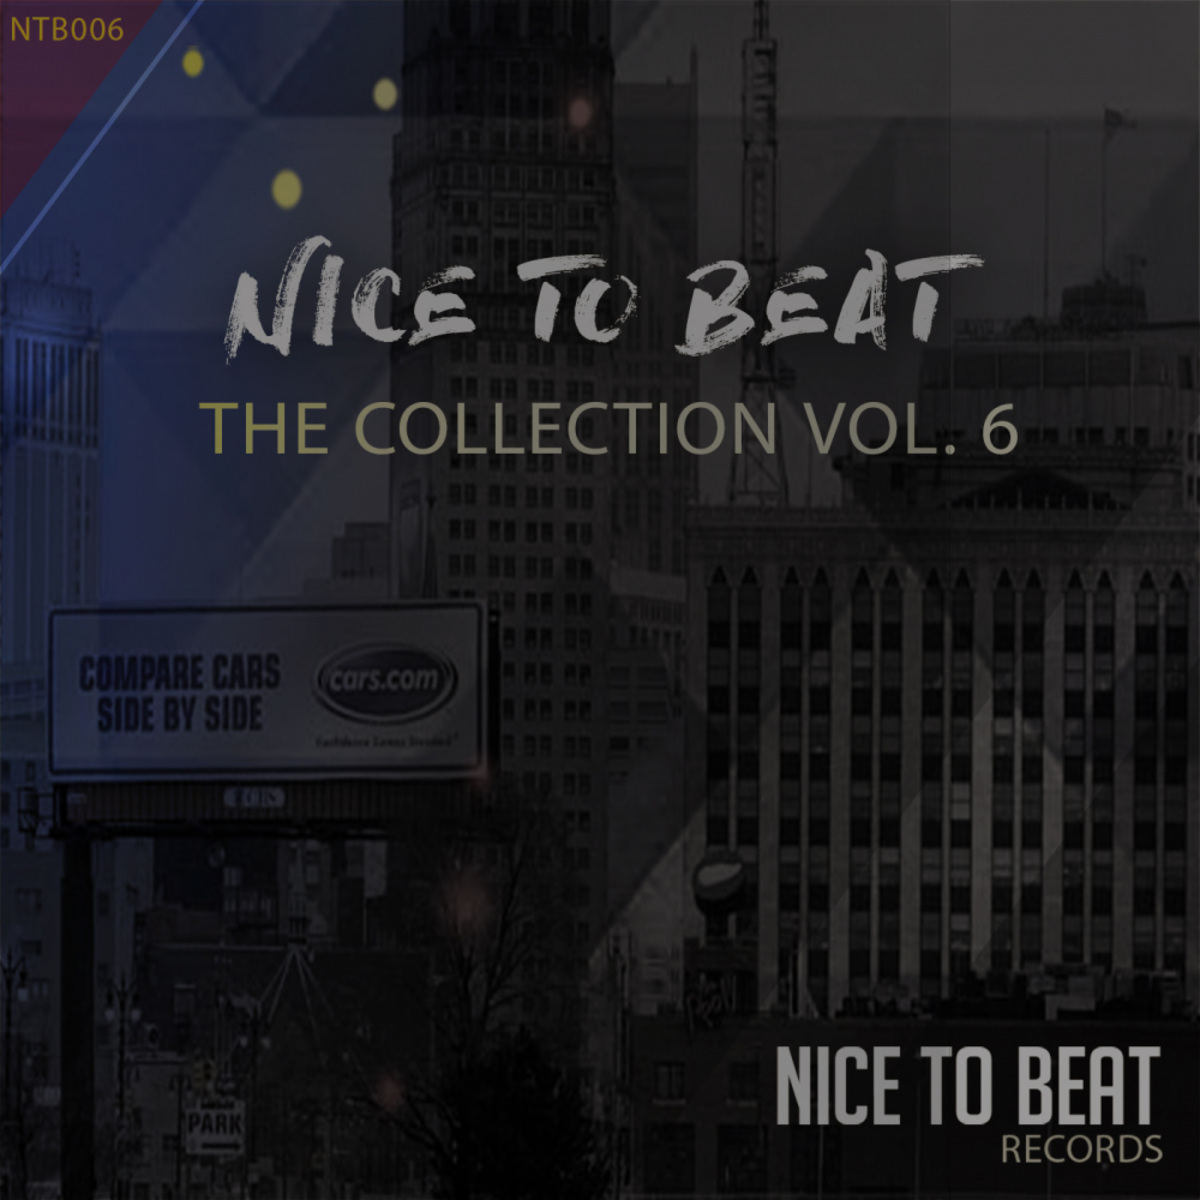 VA - The Collection, Vol. 6 / Nice to beat Rec